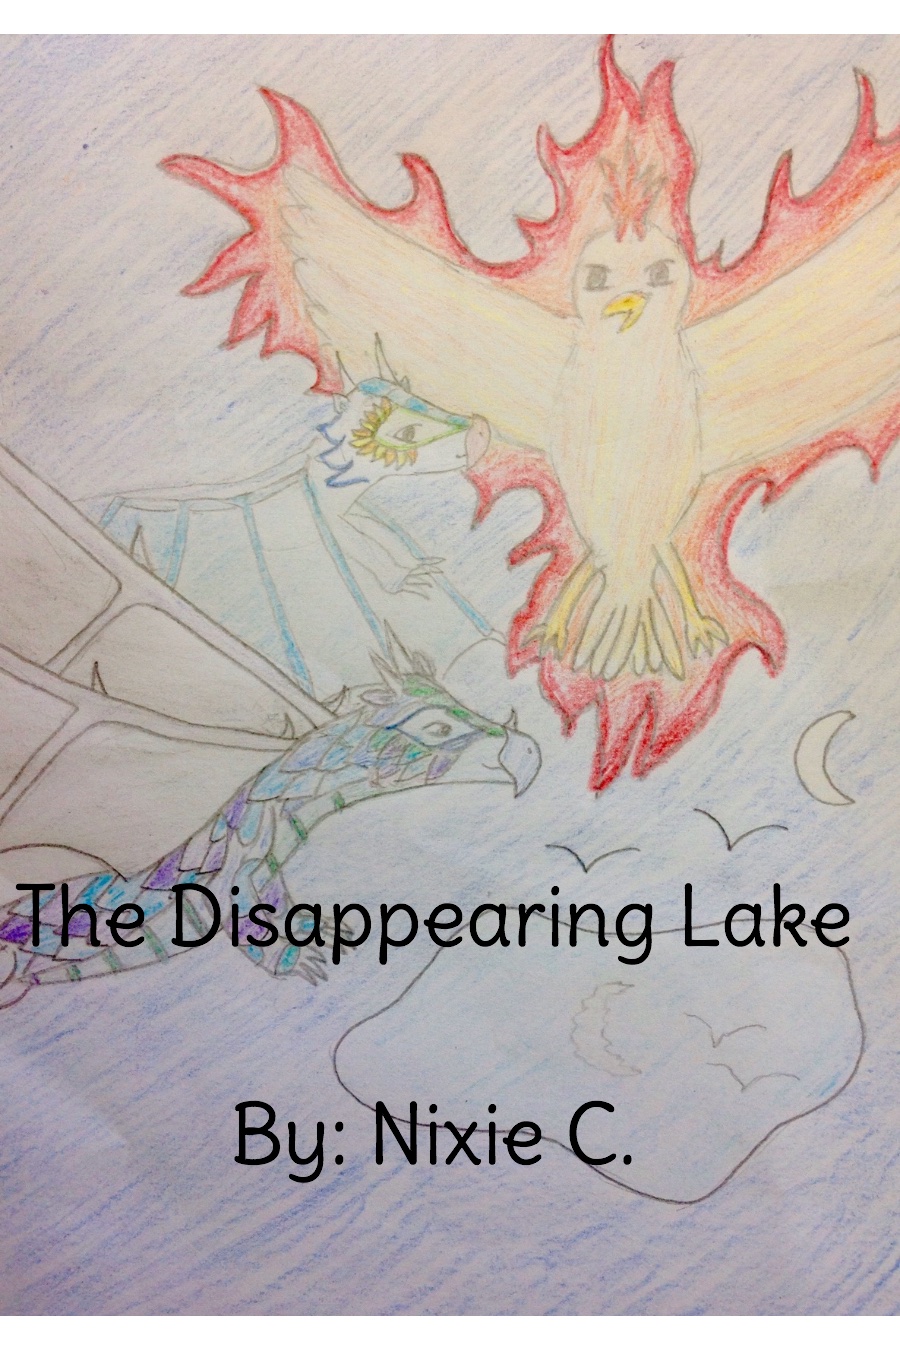 The Disappearing Lake by Nicole Nixie C